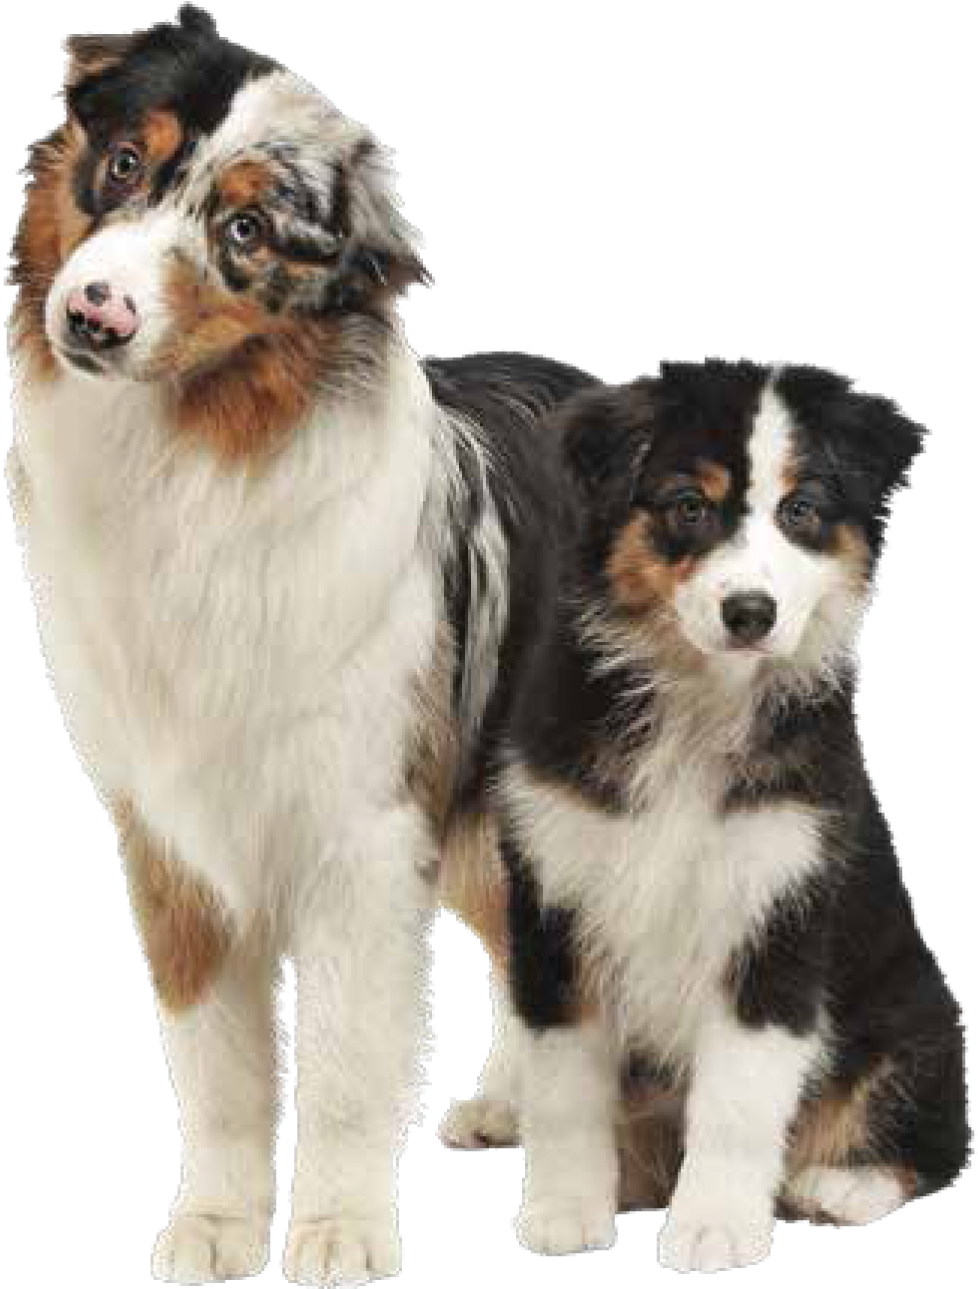 Australian Shepherd For Sale | Affordable Puppies for Sale, american west, working dogs, other pets, pups grew, active families, australian shepherds, blue merle, australian shepherd breed, australian shepherd history, australian shepherd club, herding instincts, australian shepherd's origin, local animal shelter, collie eye anomaly, miniature american shepherd, adult dog, aussie rescue, breed club, australian shepherd colors, rescue dogs, good apartment dogs, breed specific rescue groups, dog park, not all dogs